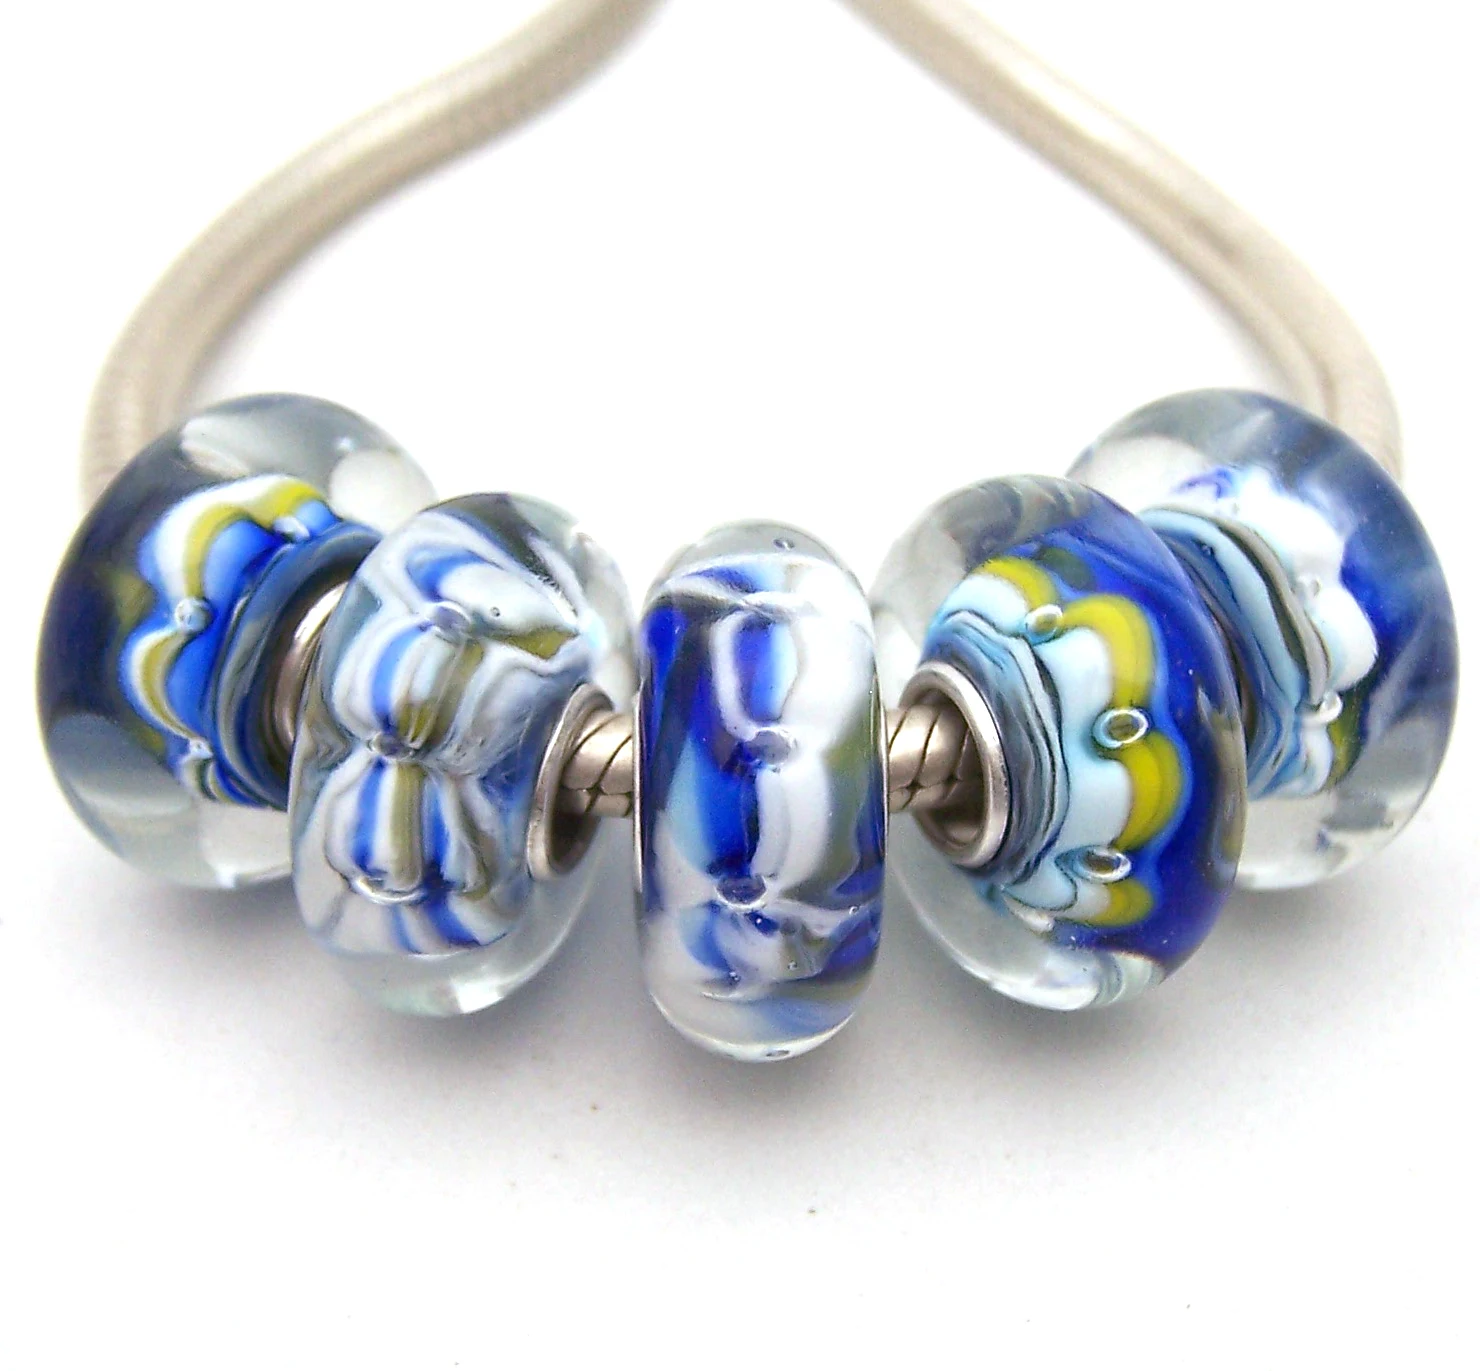 

JGWGT 2953 5X 100% Authenticity S925 Sterling Silver Beads Murano Glass beads Fit European Charms Bracelet diy jewelry Lampwork